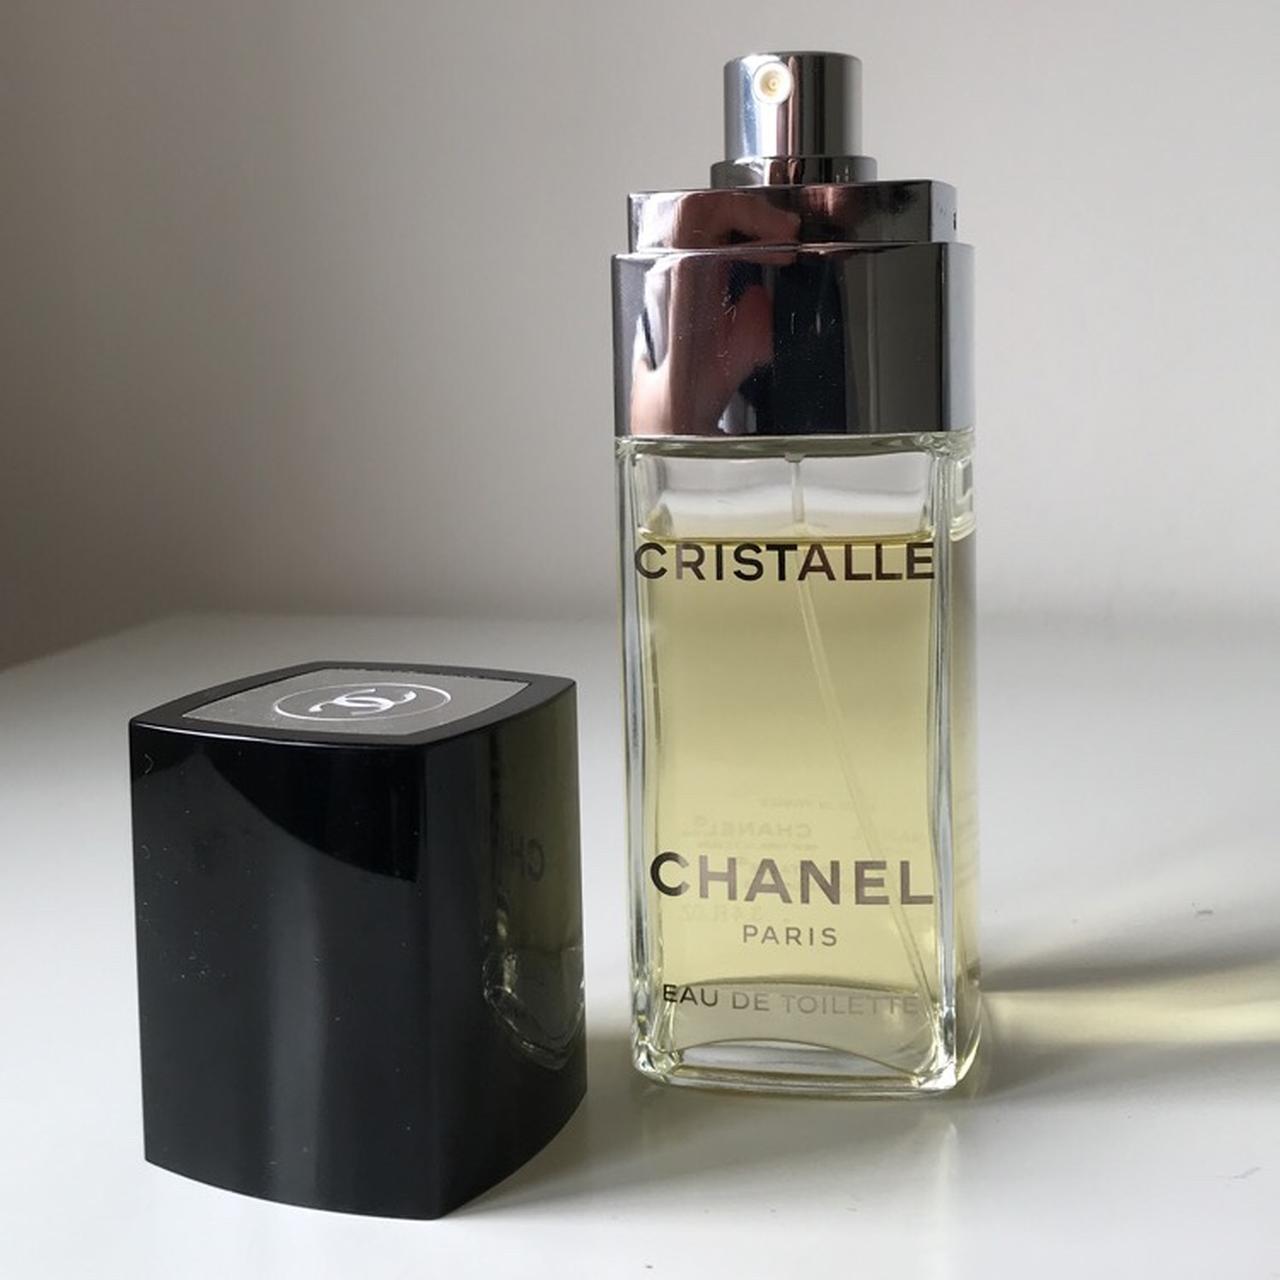 Cristalle by Chanel for Women - 3.4 oz EDT Spray